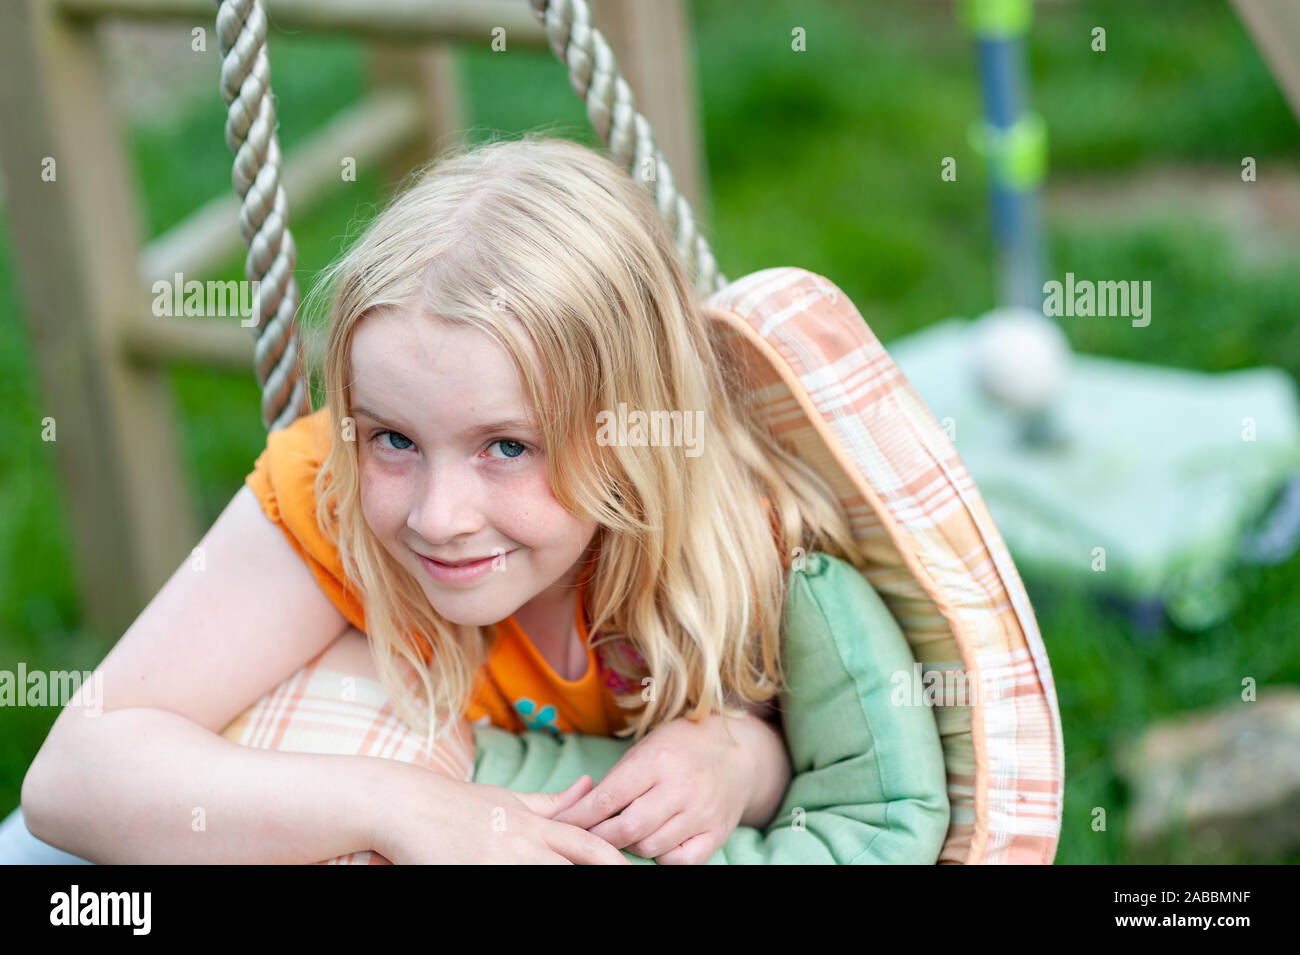 Headshot of pretty young blonde girl making eye contact and smiling Stock Photo